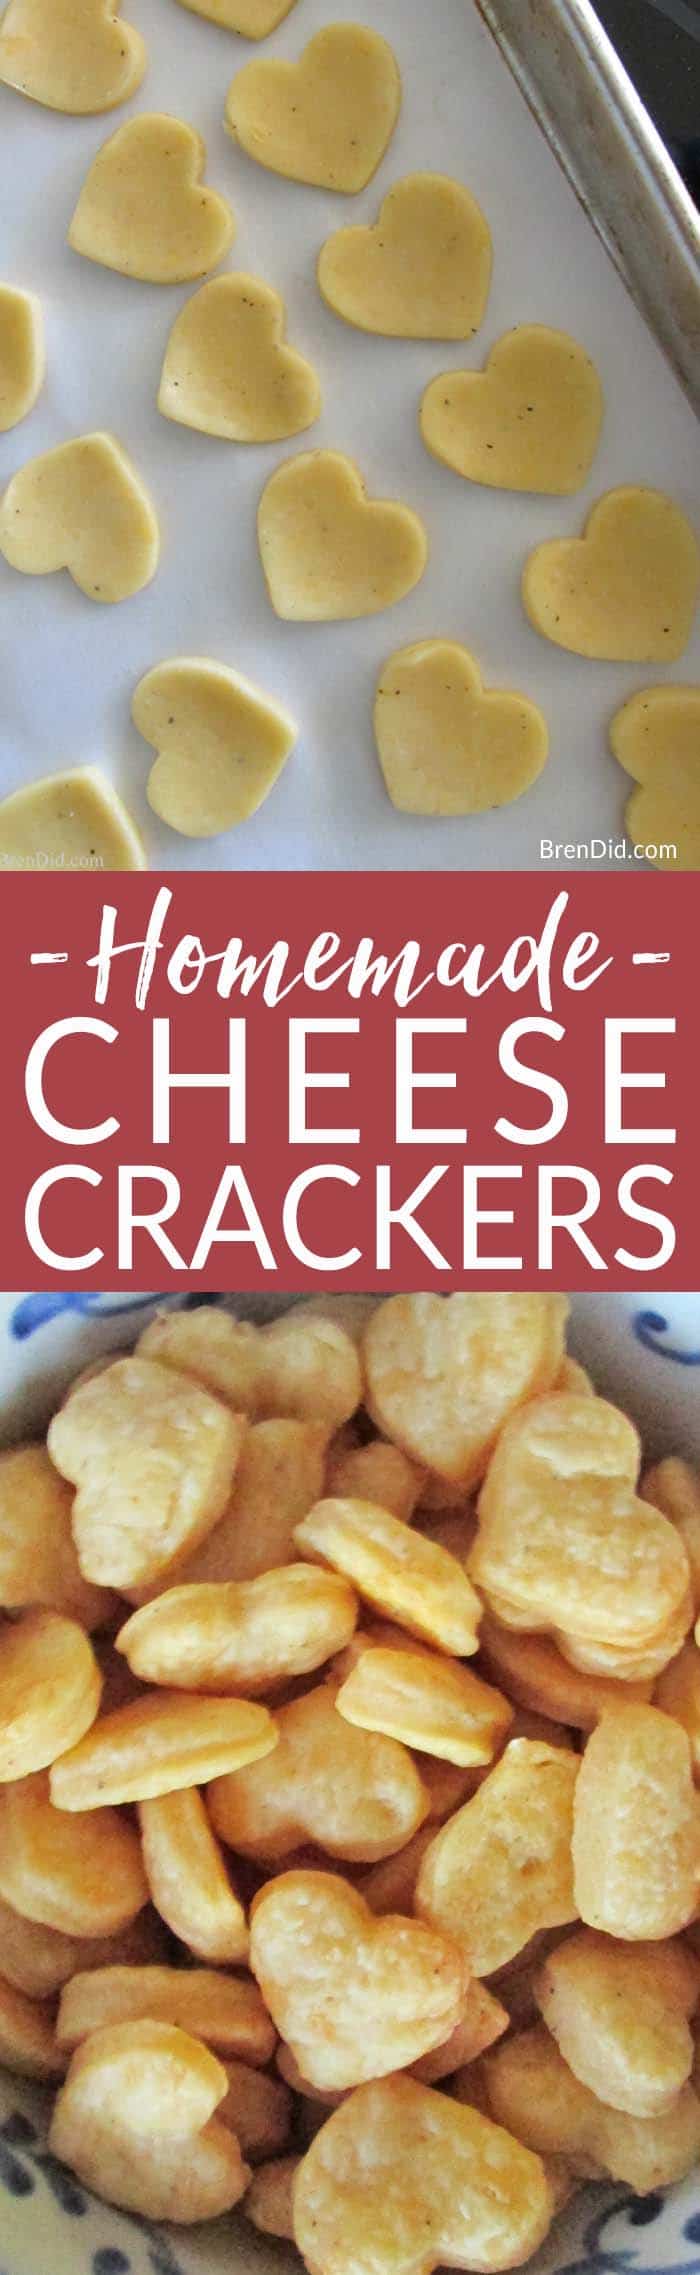 Homemade Chesee Crackers from Bren Did